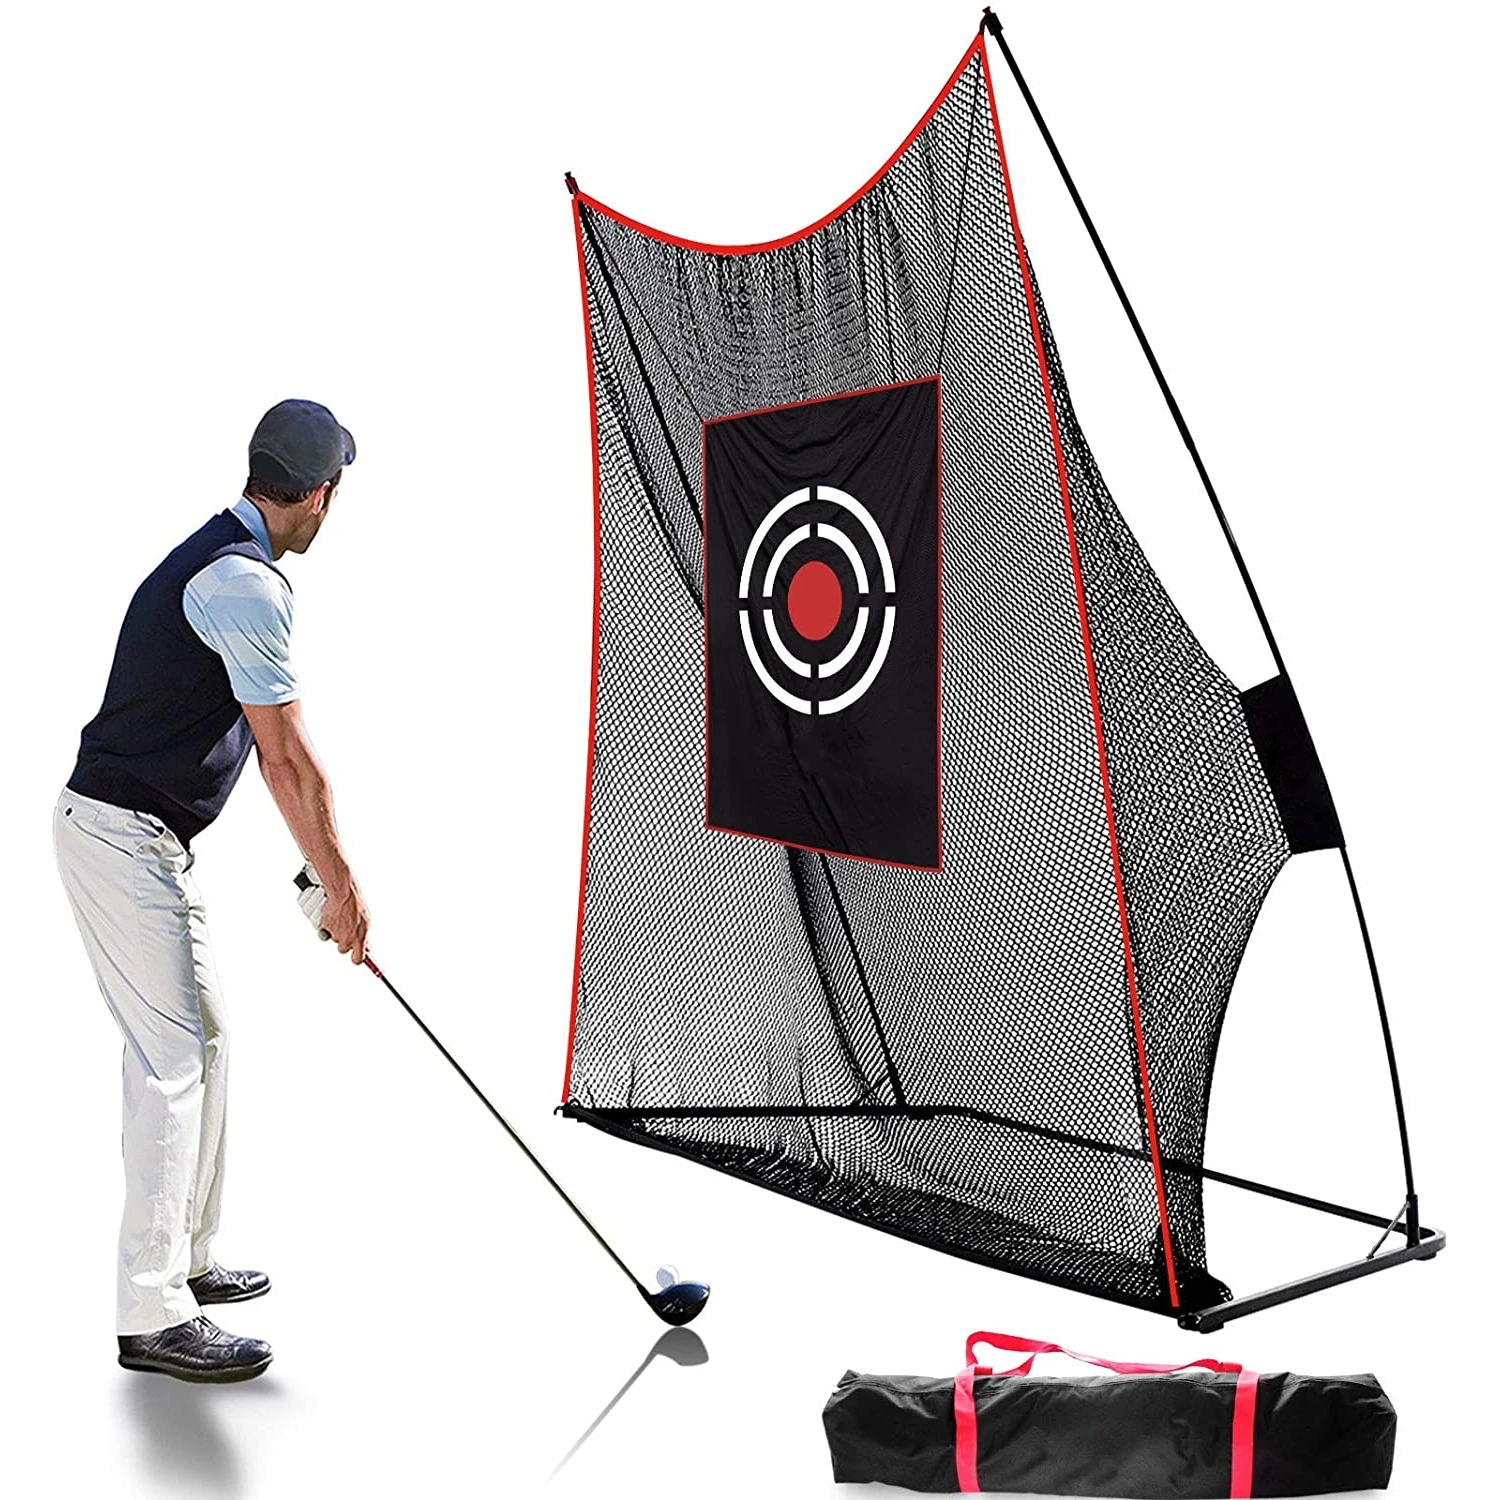 

Heavy Duty Golf Practice Net,Golf Practice Hitting Net,Quick Setup Golf Net with Target Cloth and Carry Bag(Style Optional)